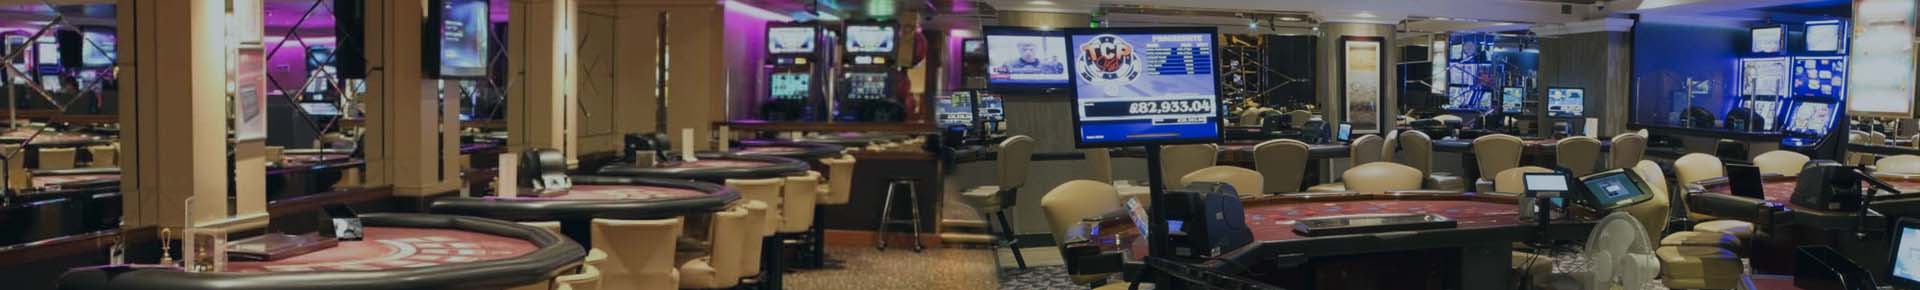 Jackpots Super fast Local online craps casino Opinion, Incentive And Points